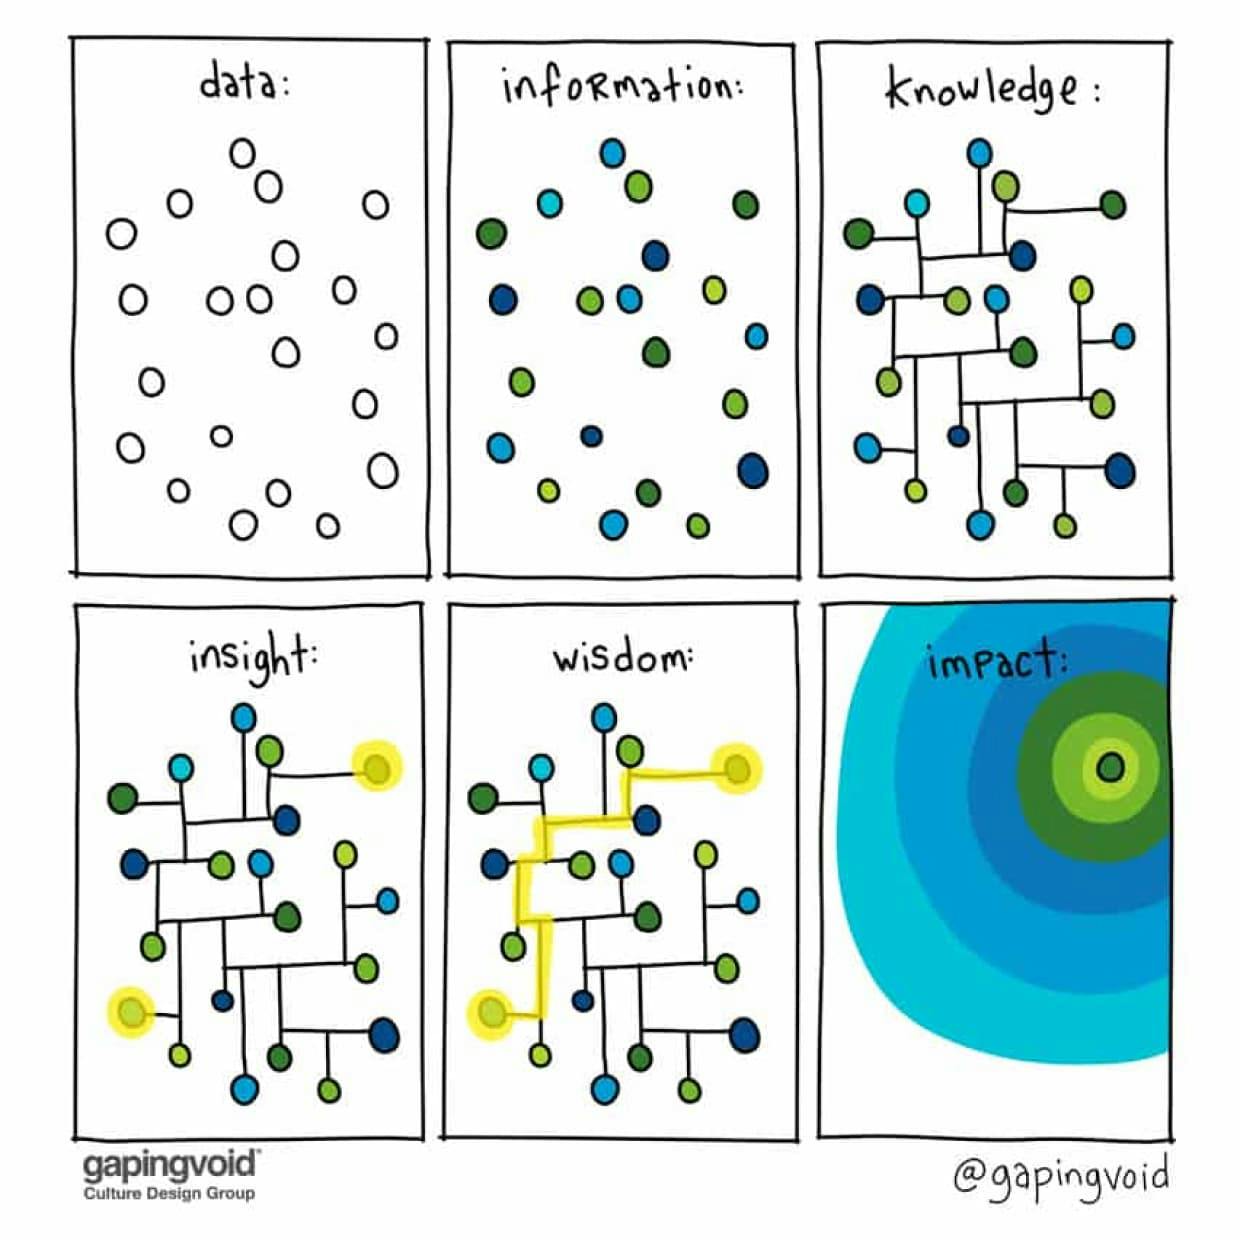 Data is only a point of reference. Information is data with context. Knowledge is information with experience.